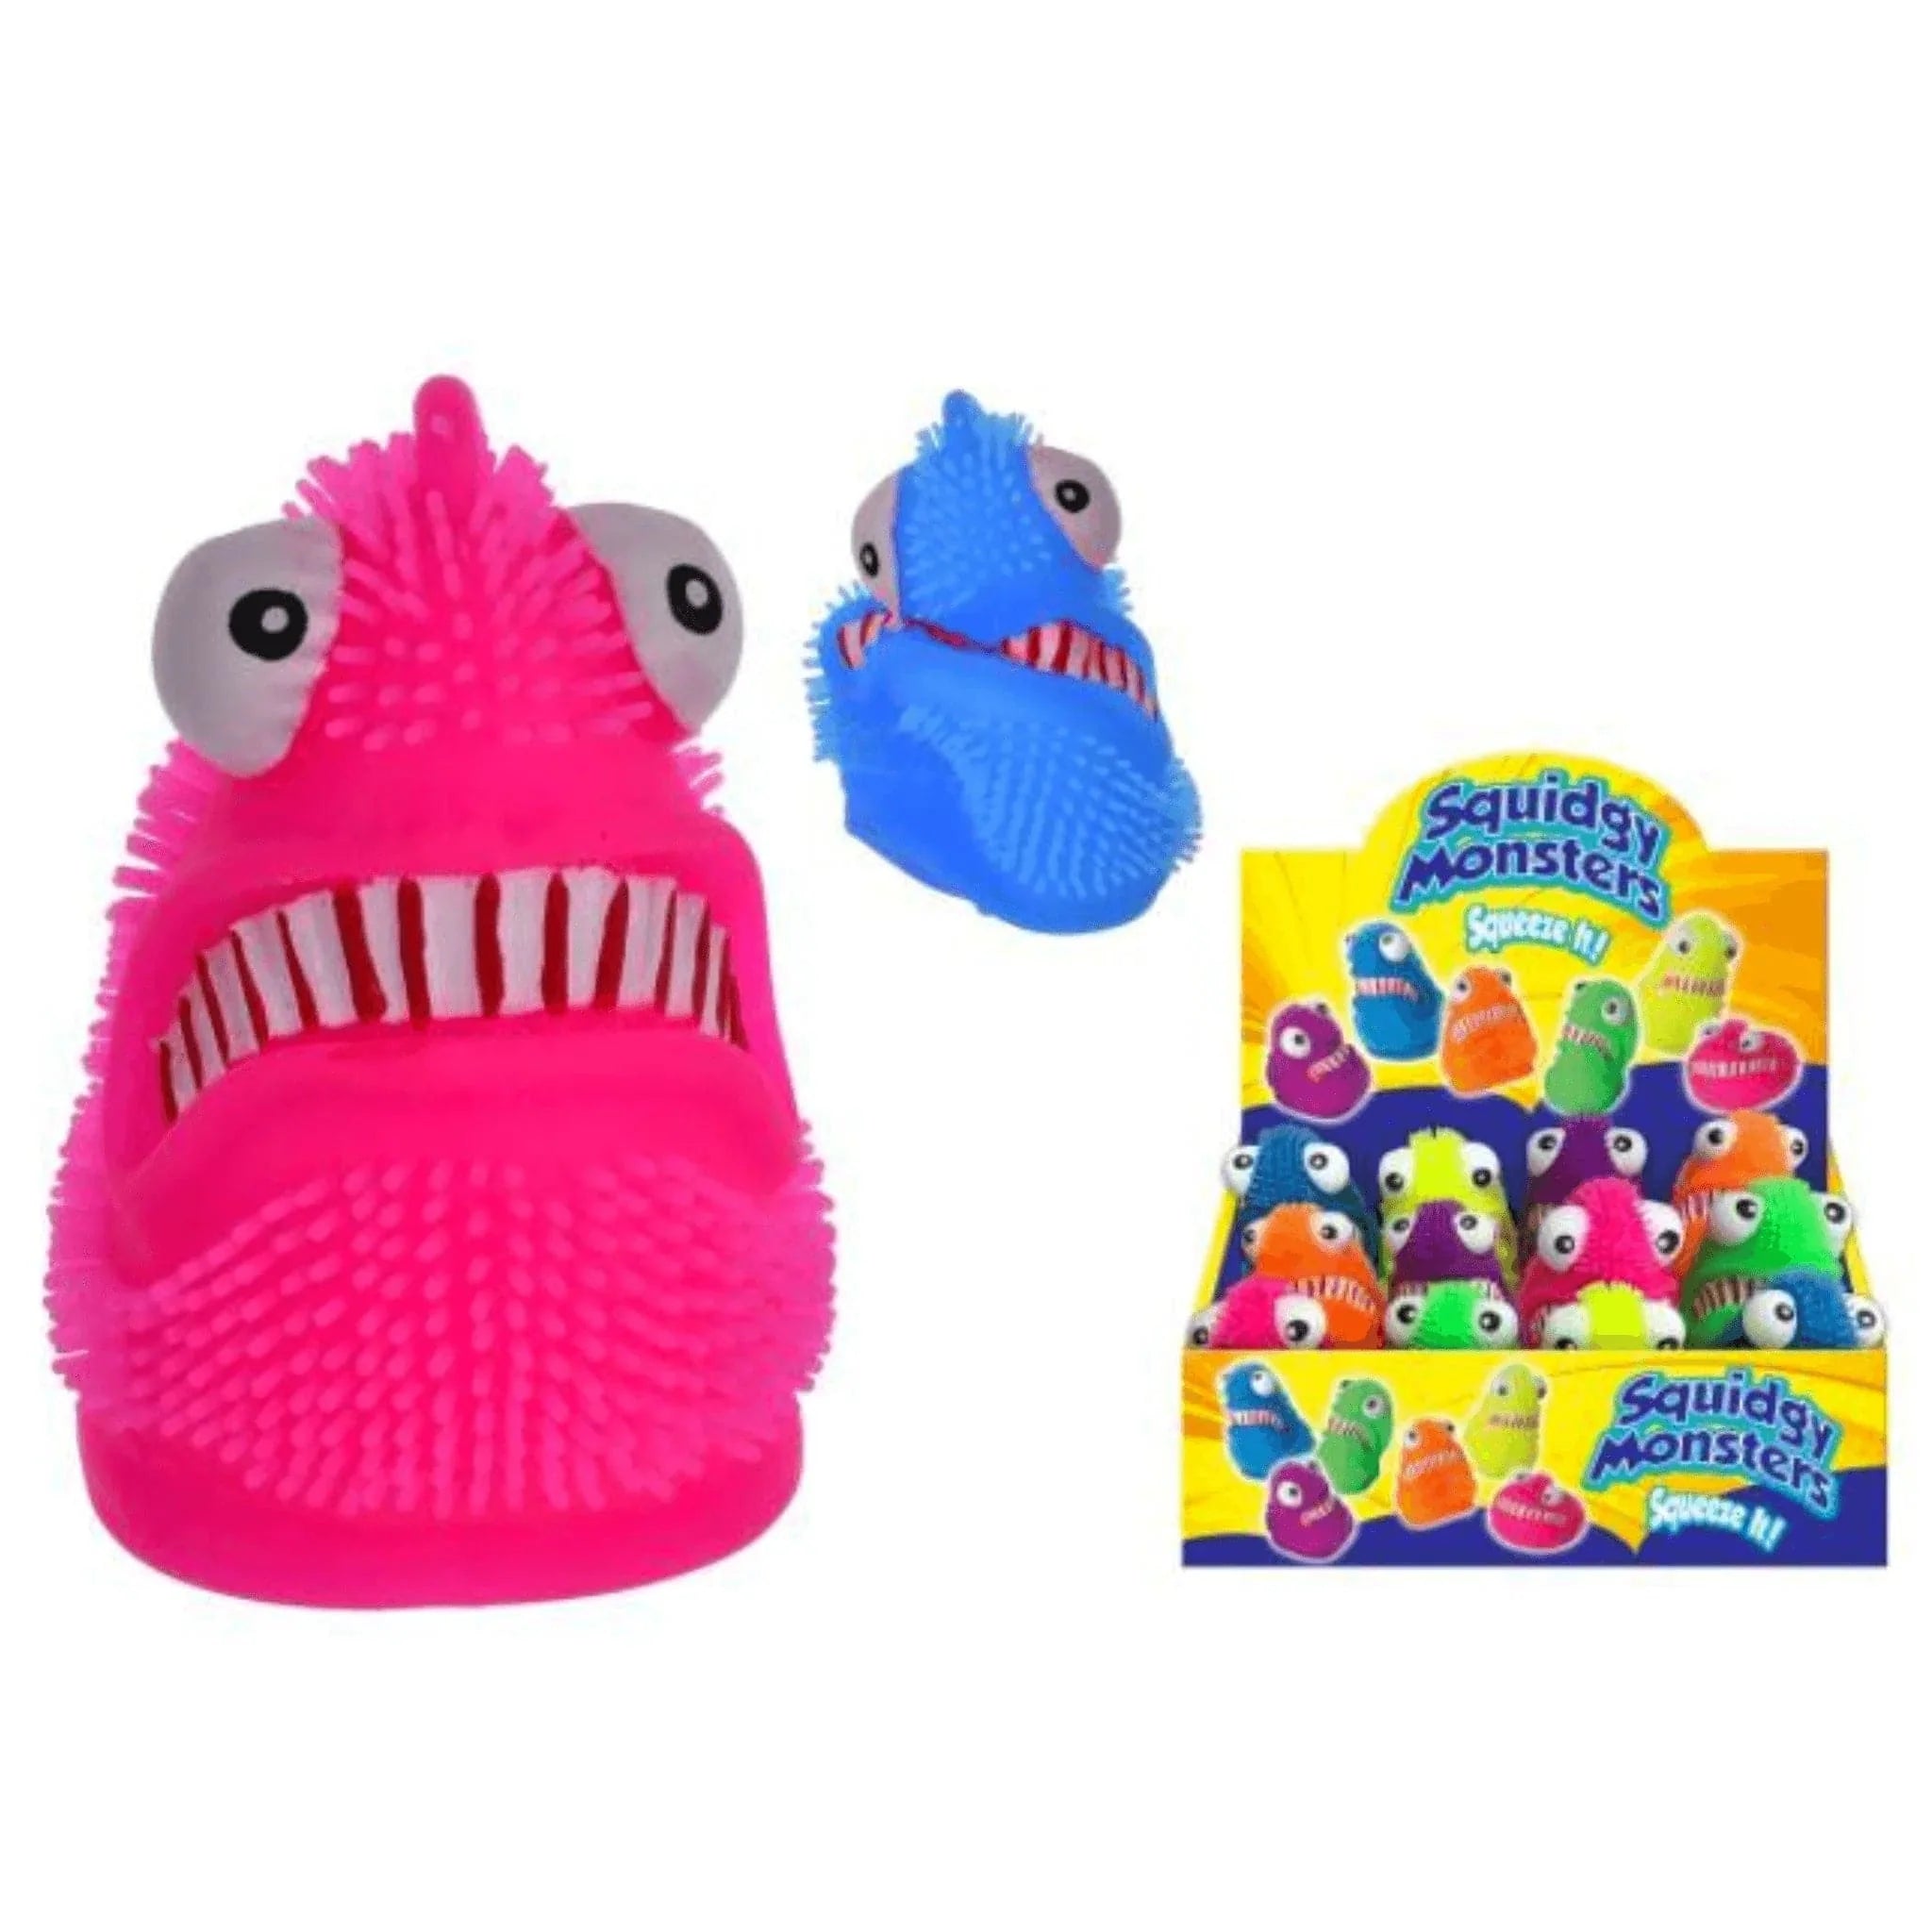 Squidgy Monster Creatures - Kids Party Craft